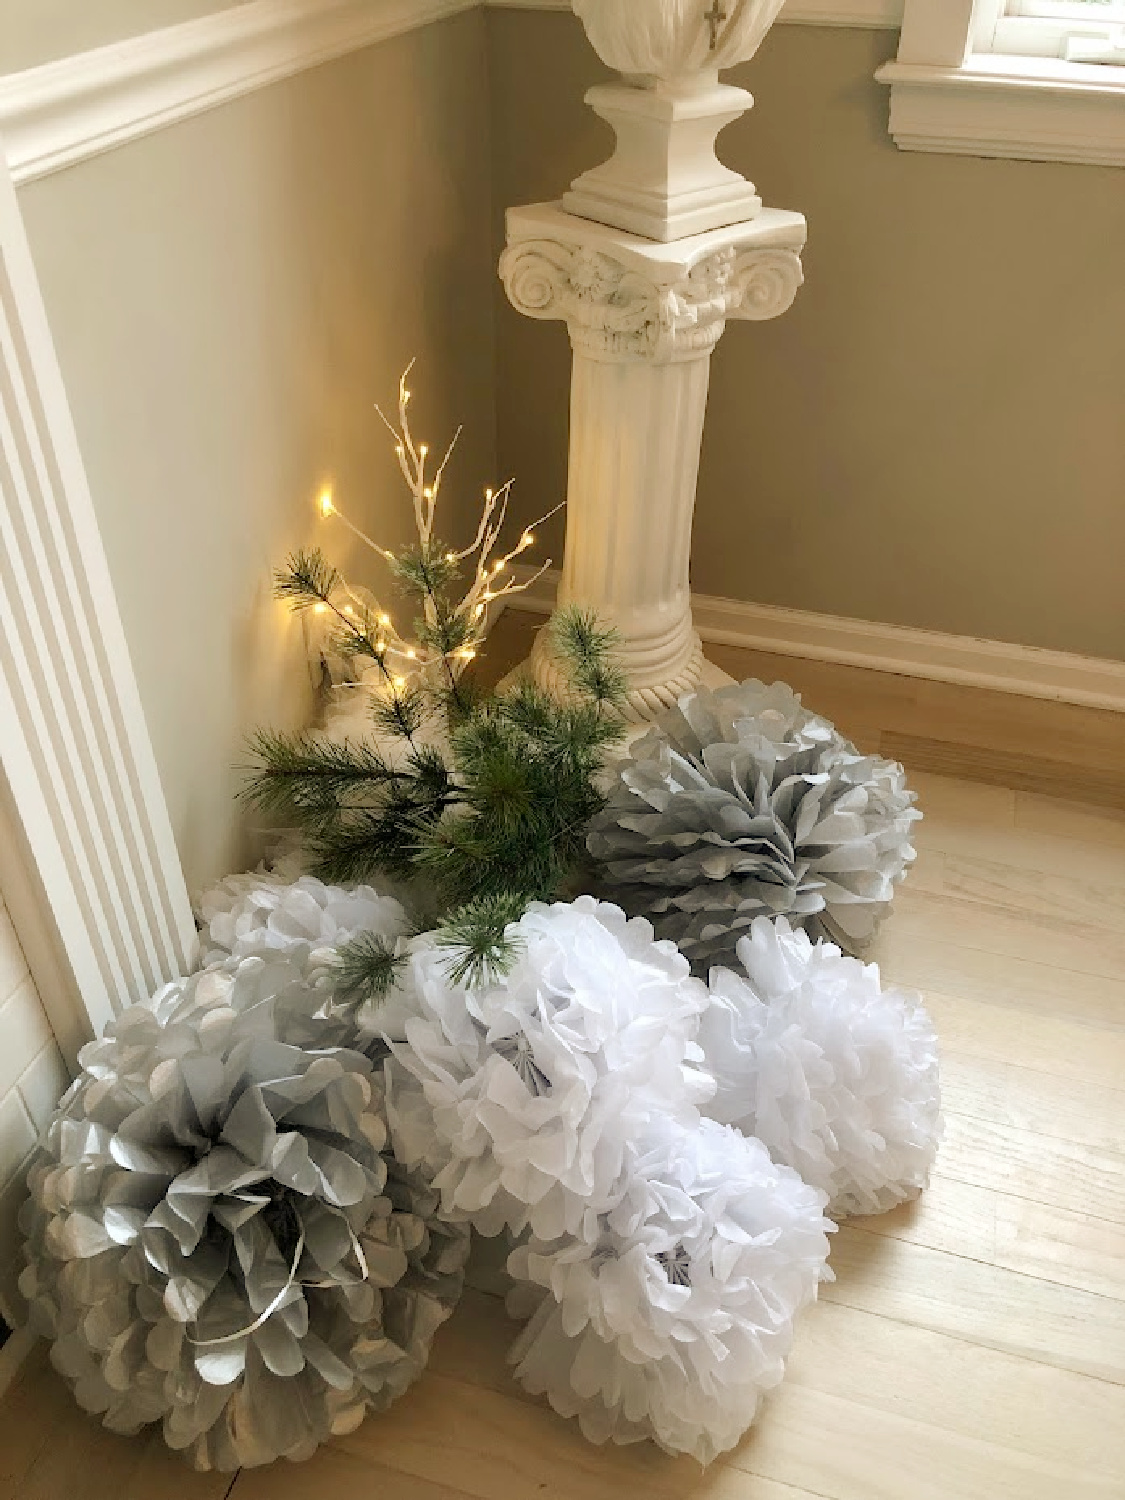 Hello Lovely's serene white holiday decorations in the dining room. #hellolovelyhome